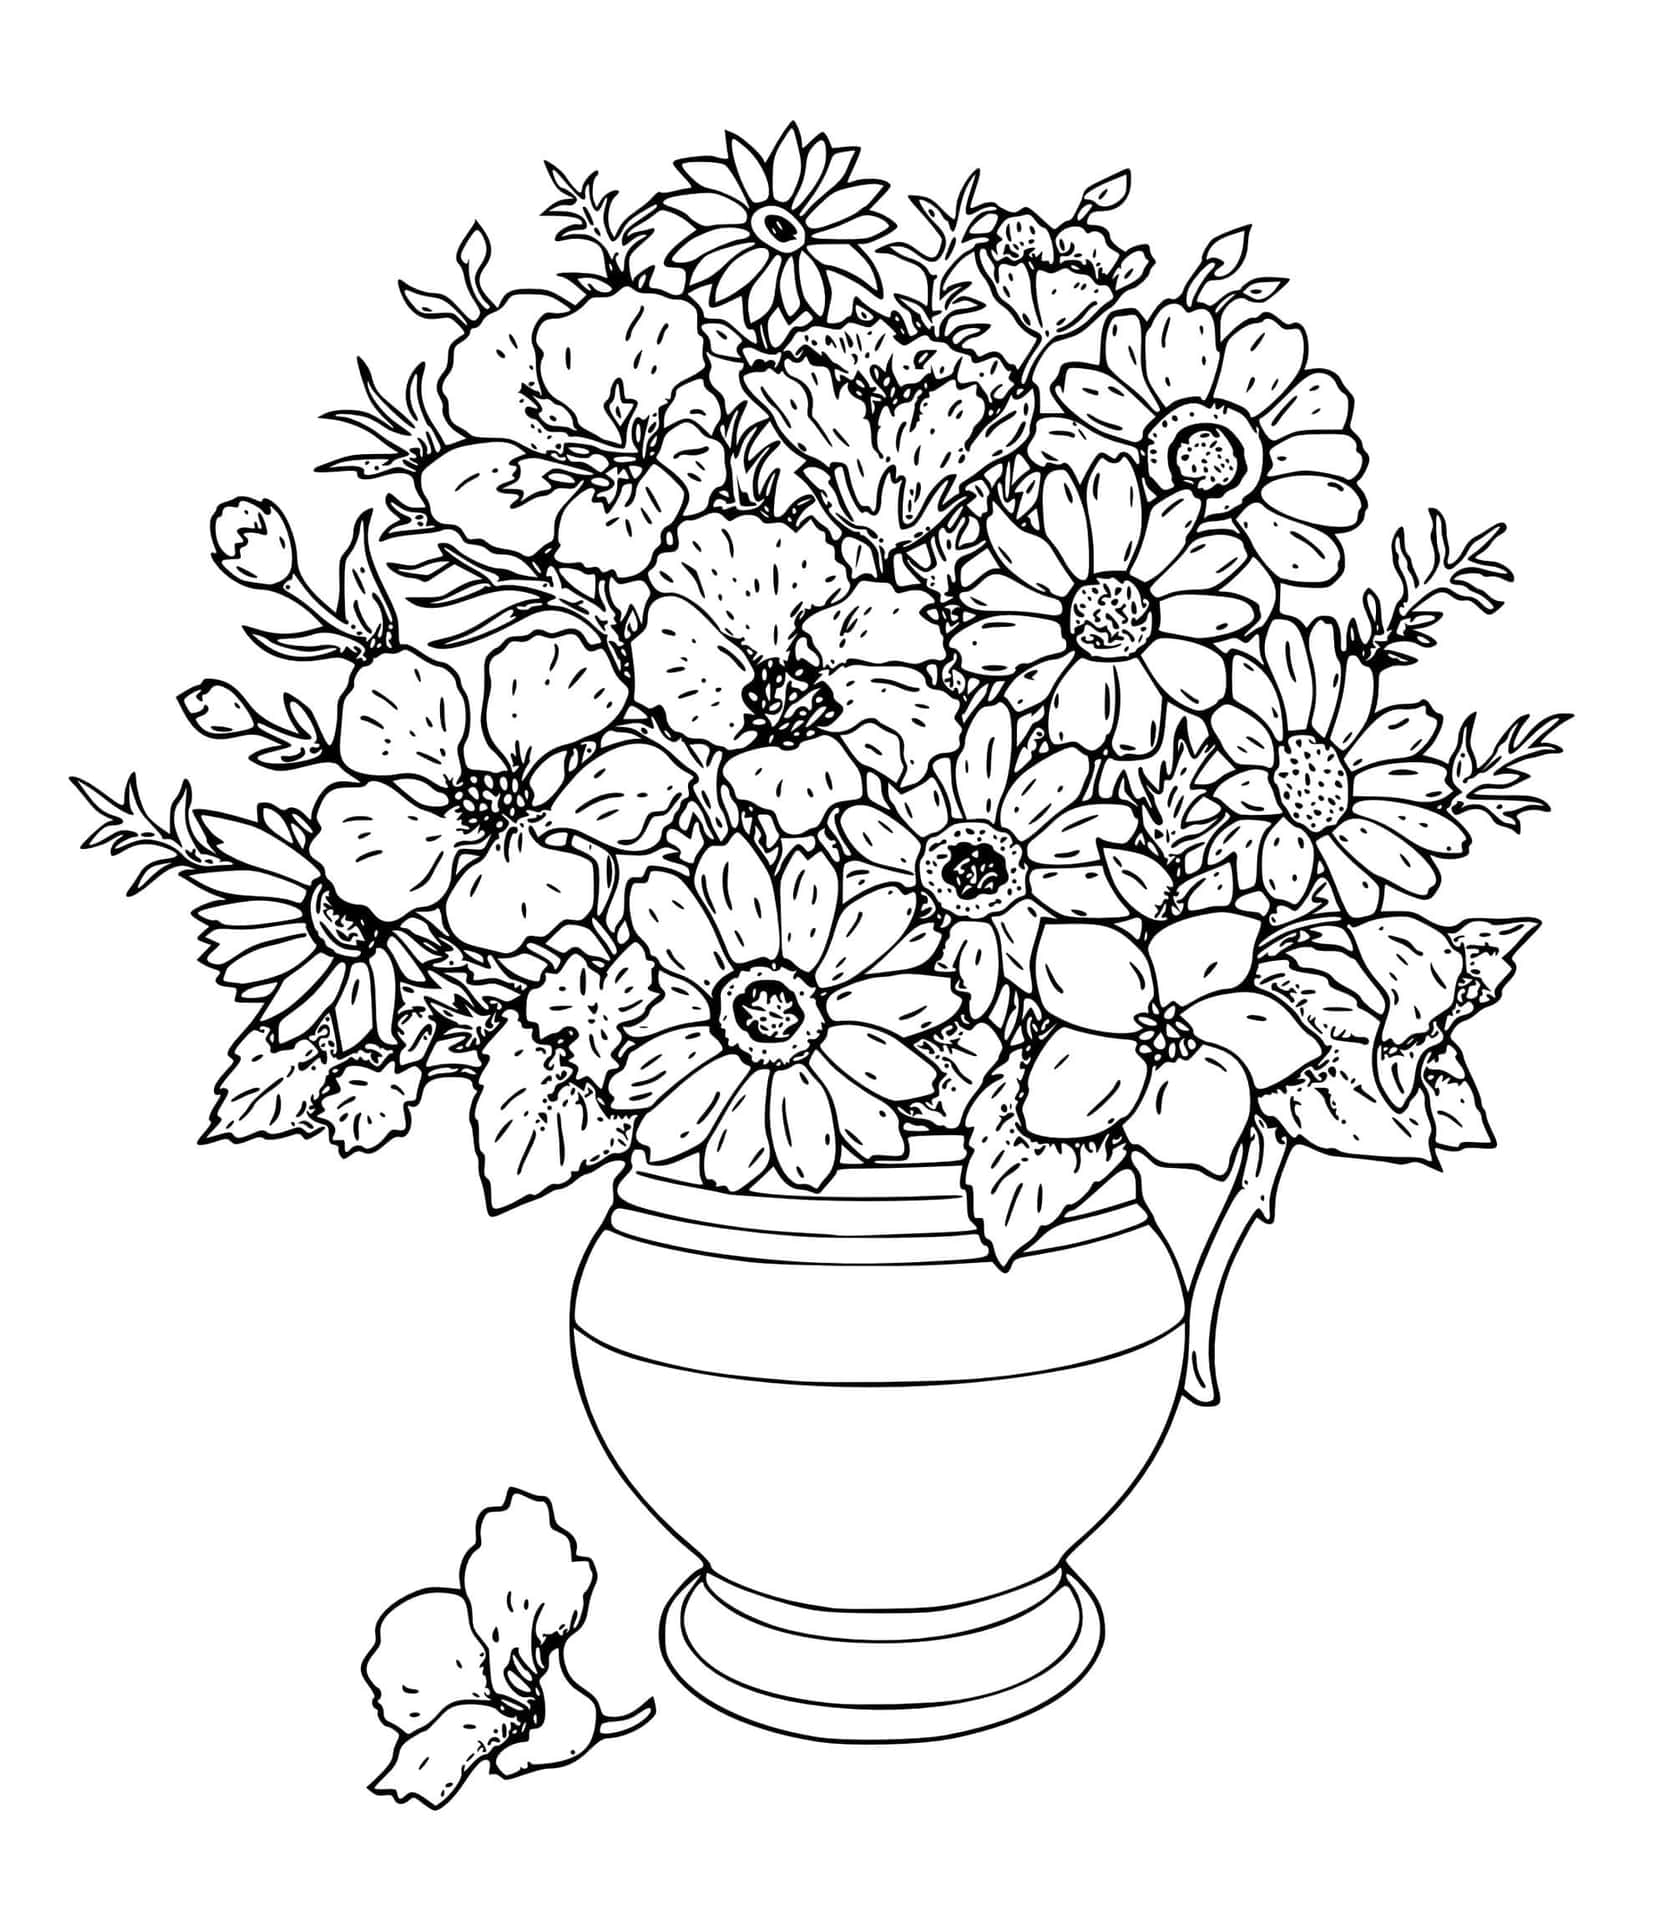 A Vase With Flowers Coloring Page